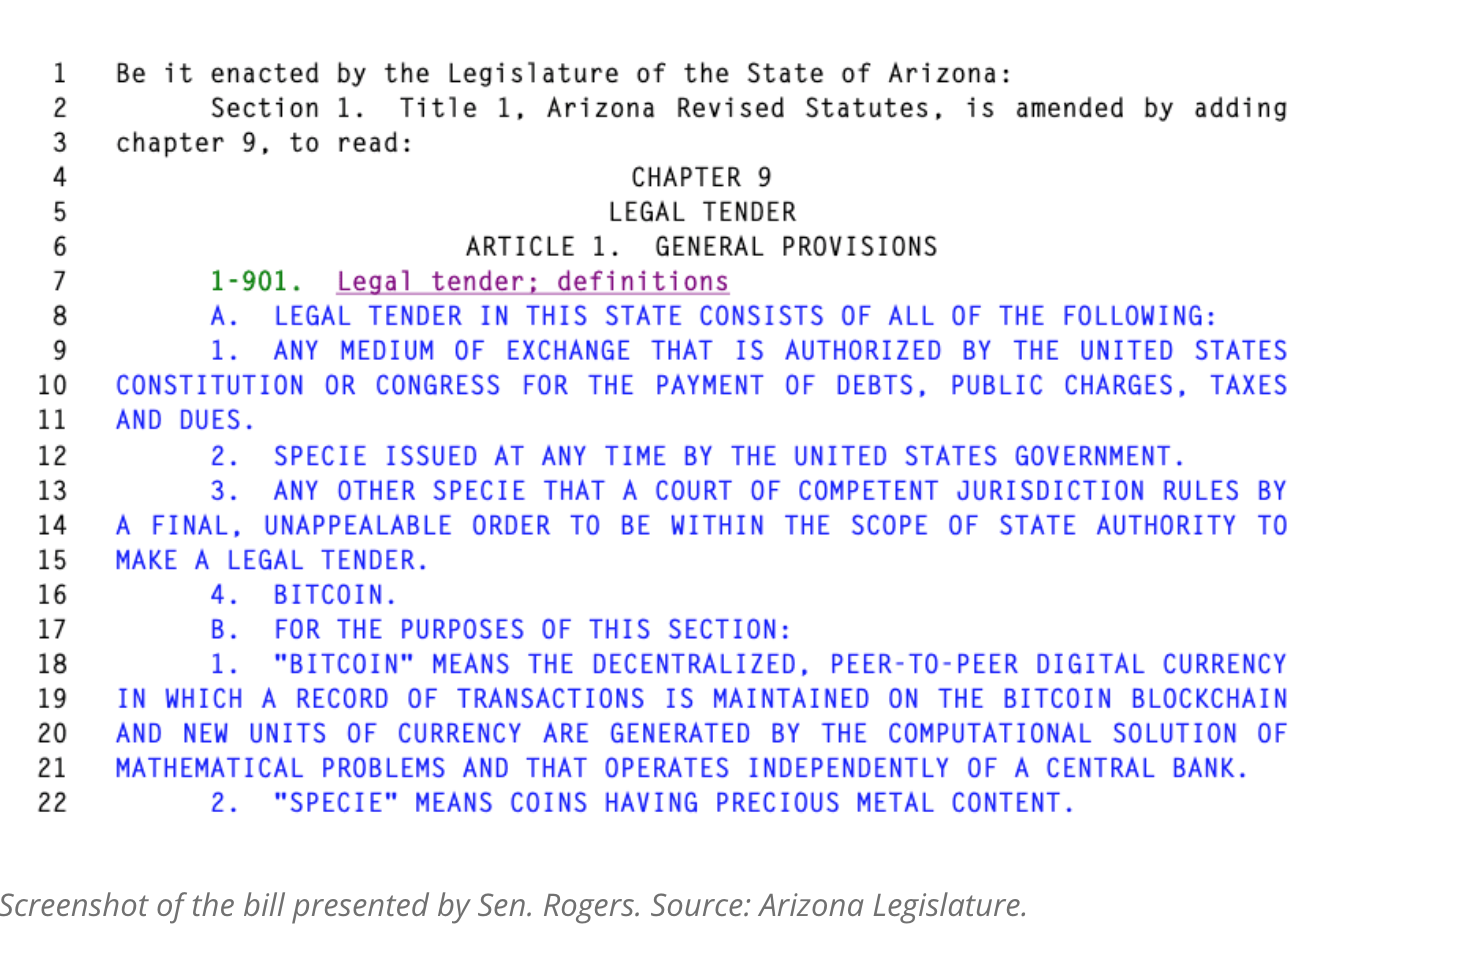 BREAKING: State Senator Introduces Bill To Make Bitcoin Legal Tender